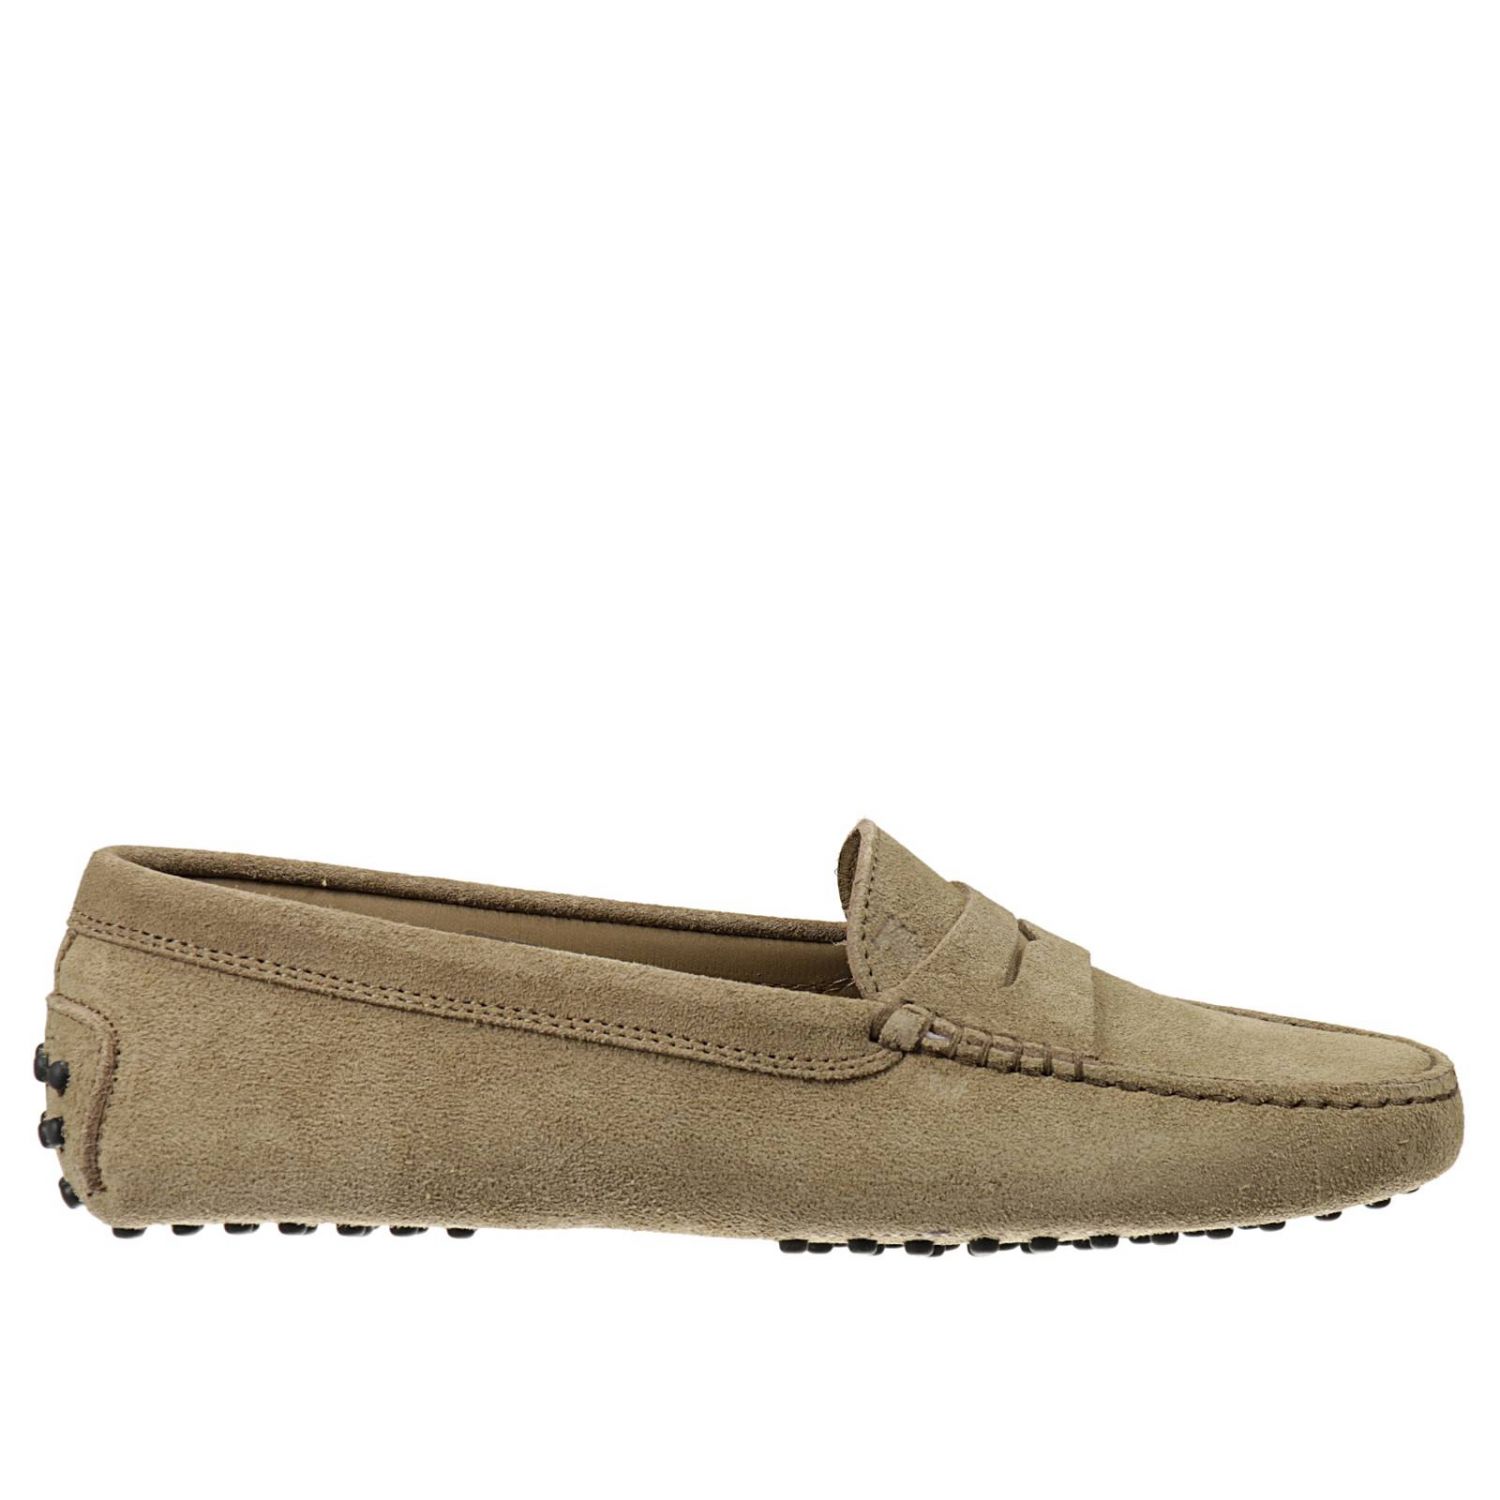 LOAFER GOMMINO SUEDE | Flat Shoes Tods Women Beige | Flat Shoes Tods ...